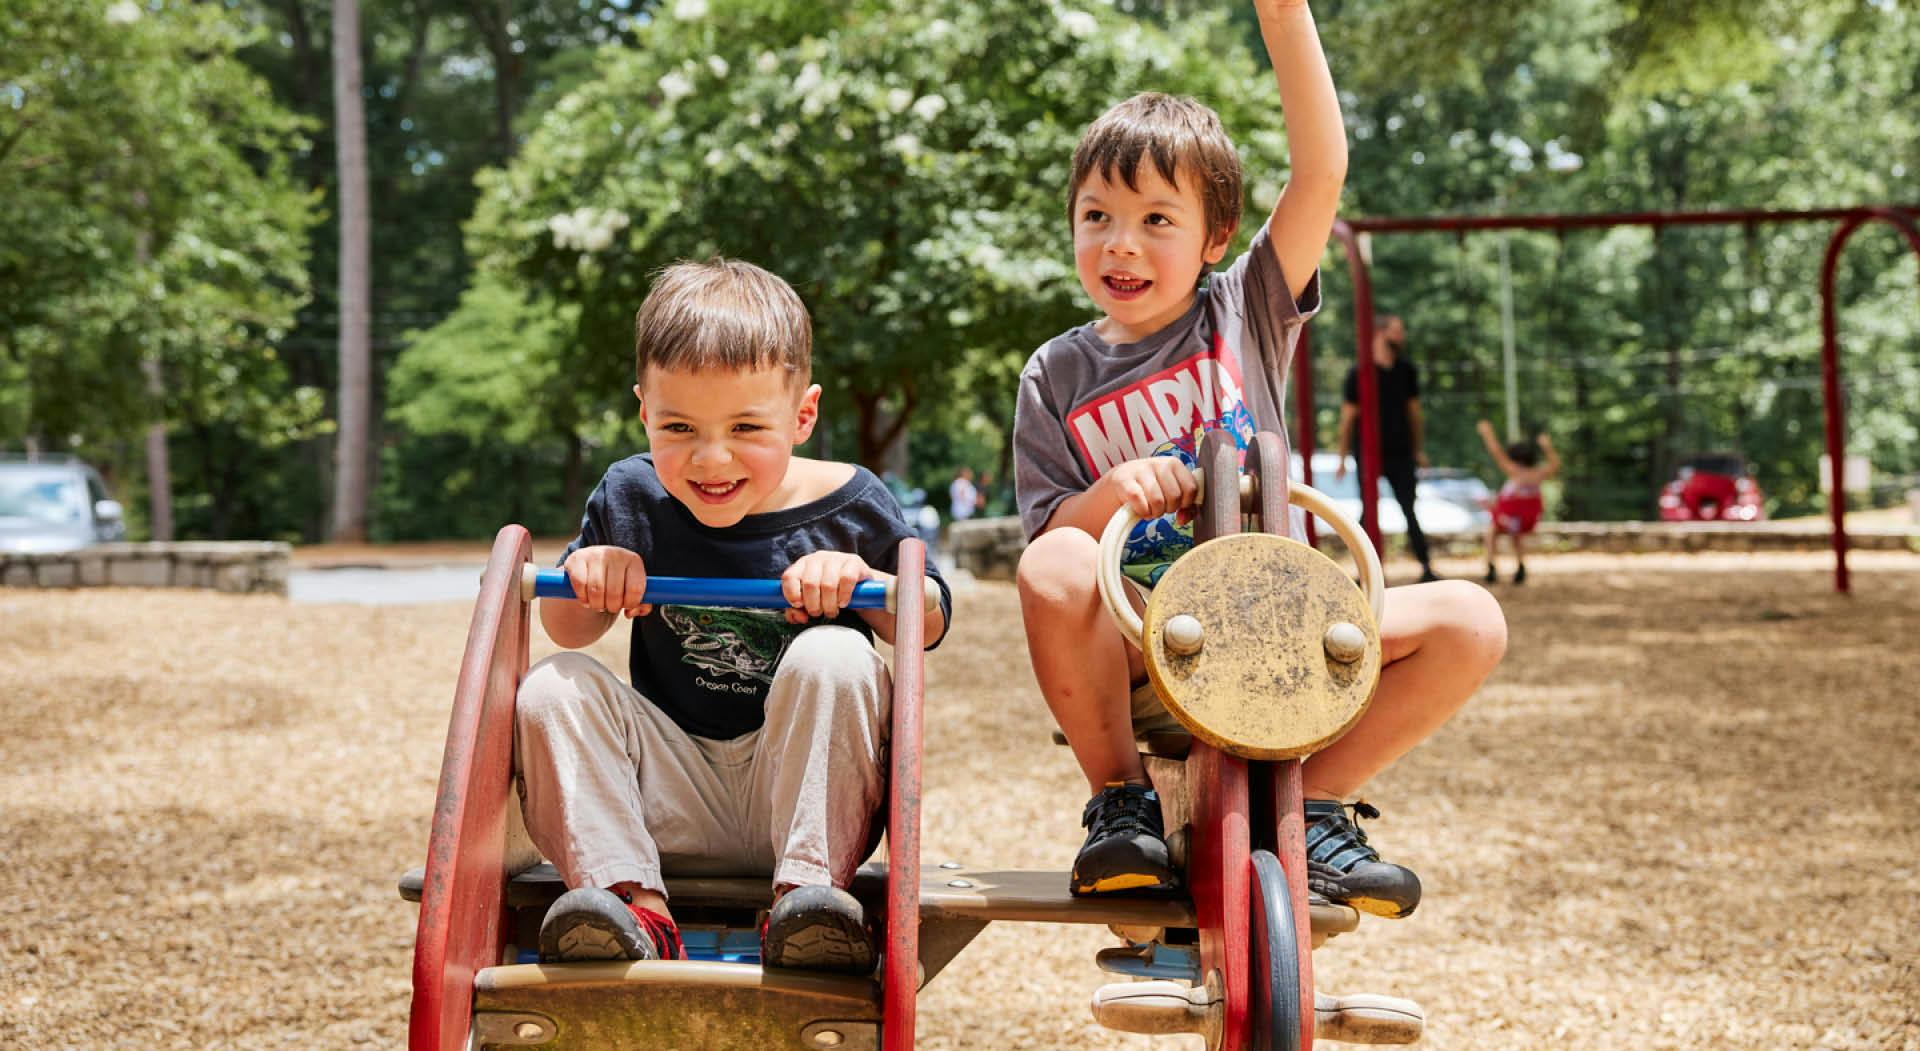 Two young boys ride on playground equipment at Perkerson Park. (Photo Credit: Erin Sintos)